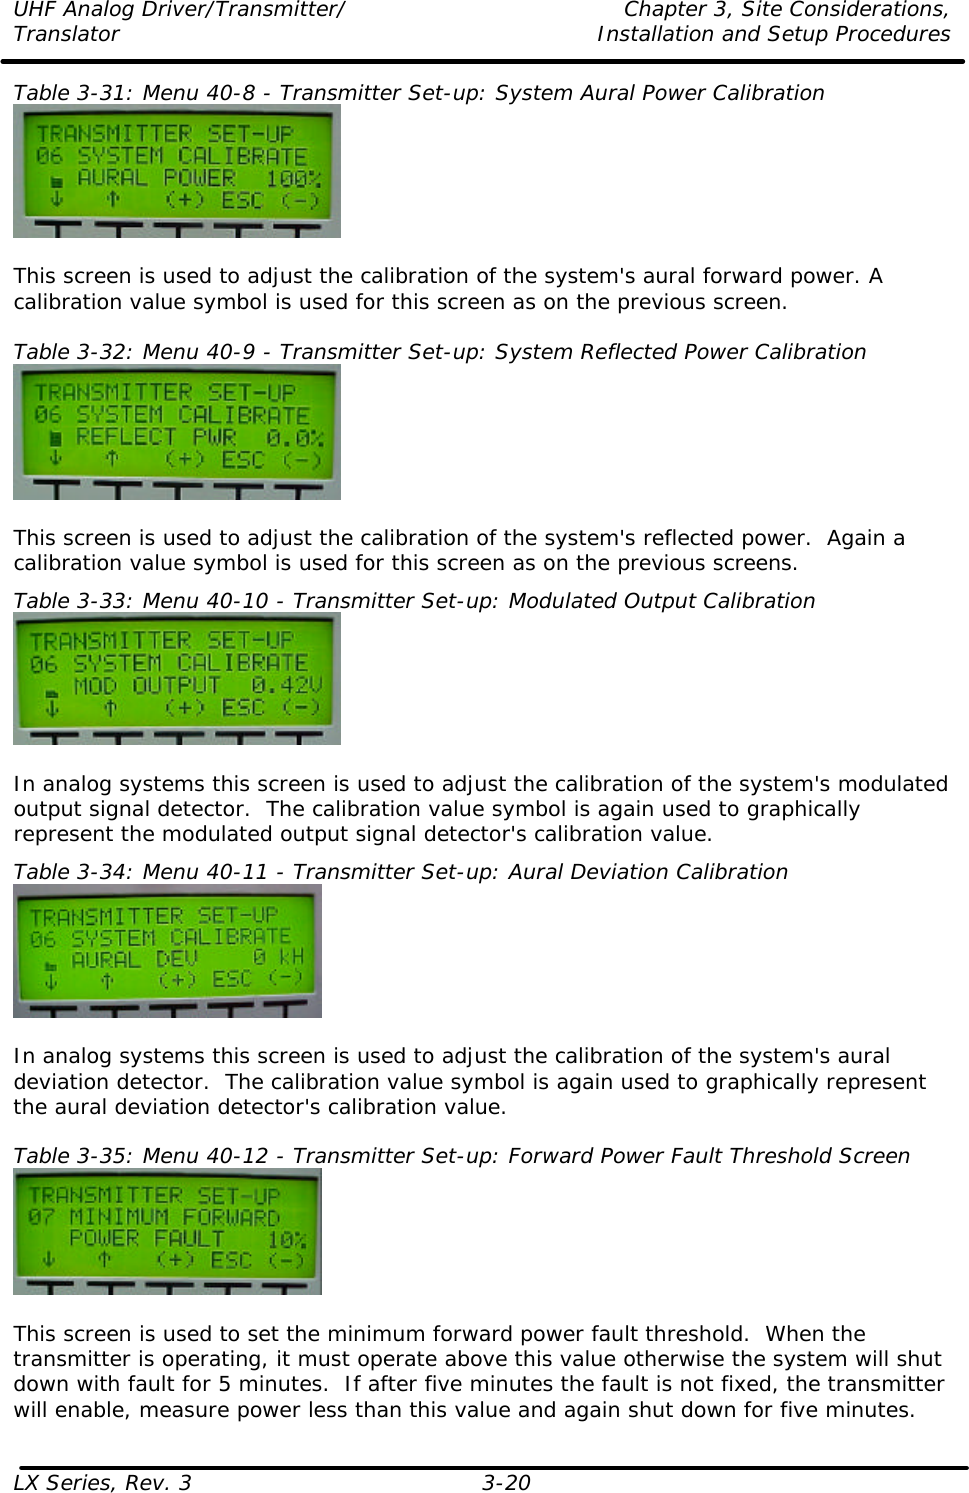 UHF Analog Driver/Transmitter/ Chapter 3, Site Considerations,  Translator Installation and Setup Procedures LX Series, Rev. 3 3-20 Table 3-31: Menu 40-8 - Transmitter Set-up: System Aural Power Calibration   This screen is used to adjust the calibration of the system&apos;s aural forward power. A calibration value symbol is used for this screen as on the previous screen.  Table 3-32: Menu 40-9 - Transmitter Set-up: System Reflected Power Calibration   This screen is used to adjust the calibration of the system&apos;s reflected power.  Again a calibration value symbol is used for this screen as on the previous screens. Table 3-33: Menu 40-10 - Transmitter Set-up: Modulated Output Calibration   In analog systems this screen is used to adjust the calibration of the system&apos;s modulated output signal detector.  The calibration value symbol is again used to graphically represent the modulated output signal detector&apos;s calibration value. Table 3-34: Menu 40-11 - Transmitter Set-up: Aural Deviation Calibration   In analog systems this screen is used to adjust the calibration of the system&apos;s aural deviation detector.  The calibration value symbol is again used to graphically represent the aural deviation detector&apos;s calibration value.  Table 3-35: Menu 40-12 - Transmitter Set-up: Forward Power Fault Threshold Screen   This screen is used to set the minimum forward power fault threshold.  When the transmitter is operating, it must operate above this value otherwise the system will shut down with fault for 5 minutes.  If after five minutes the fault is not fixed, the transmitter will enable, measure power less than this value and again shut down for five minutes. 